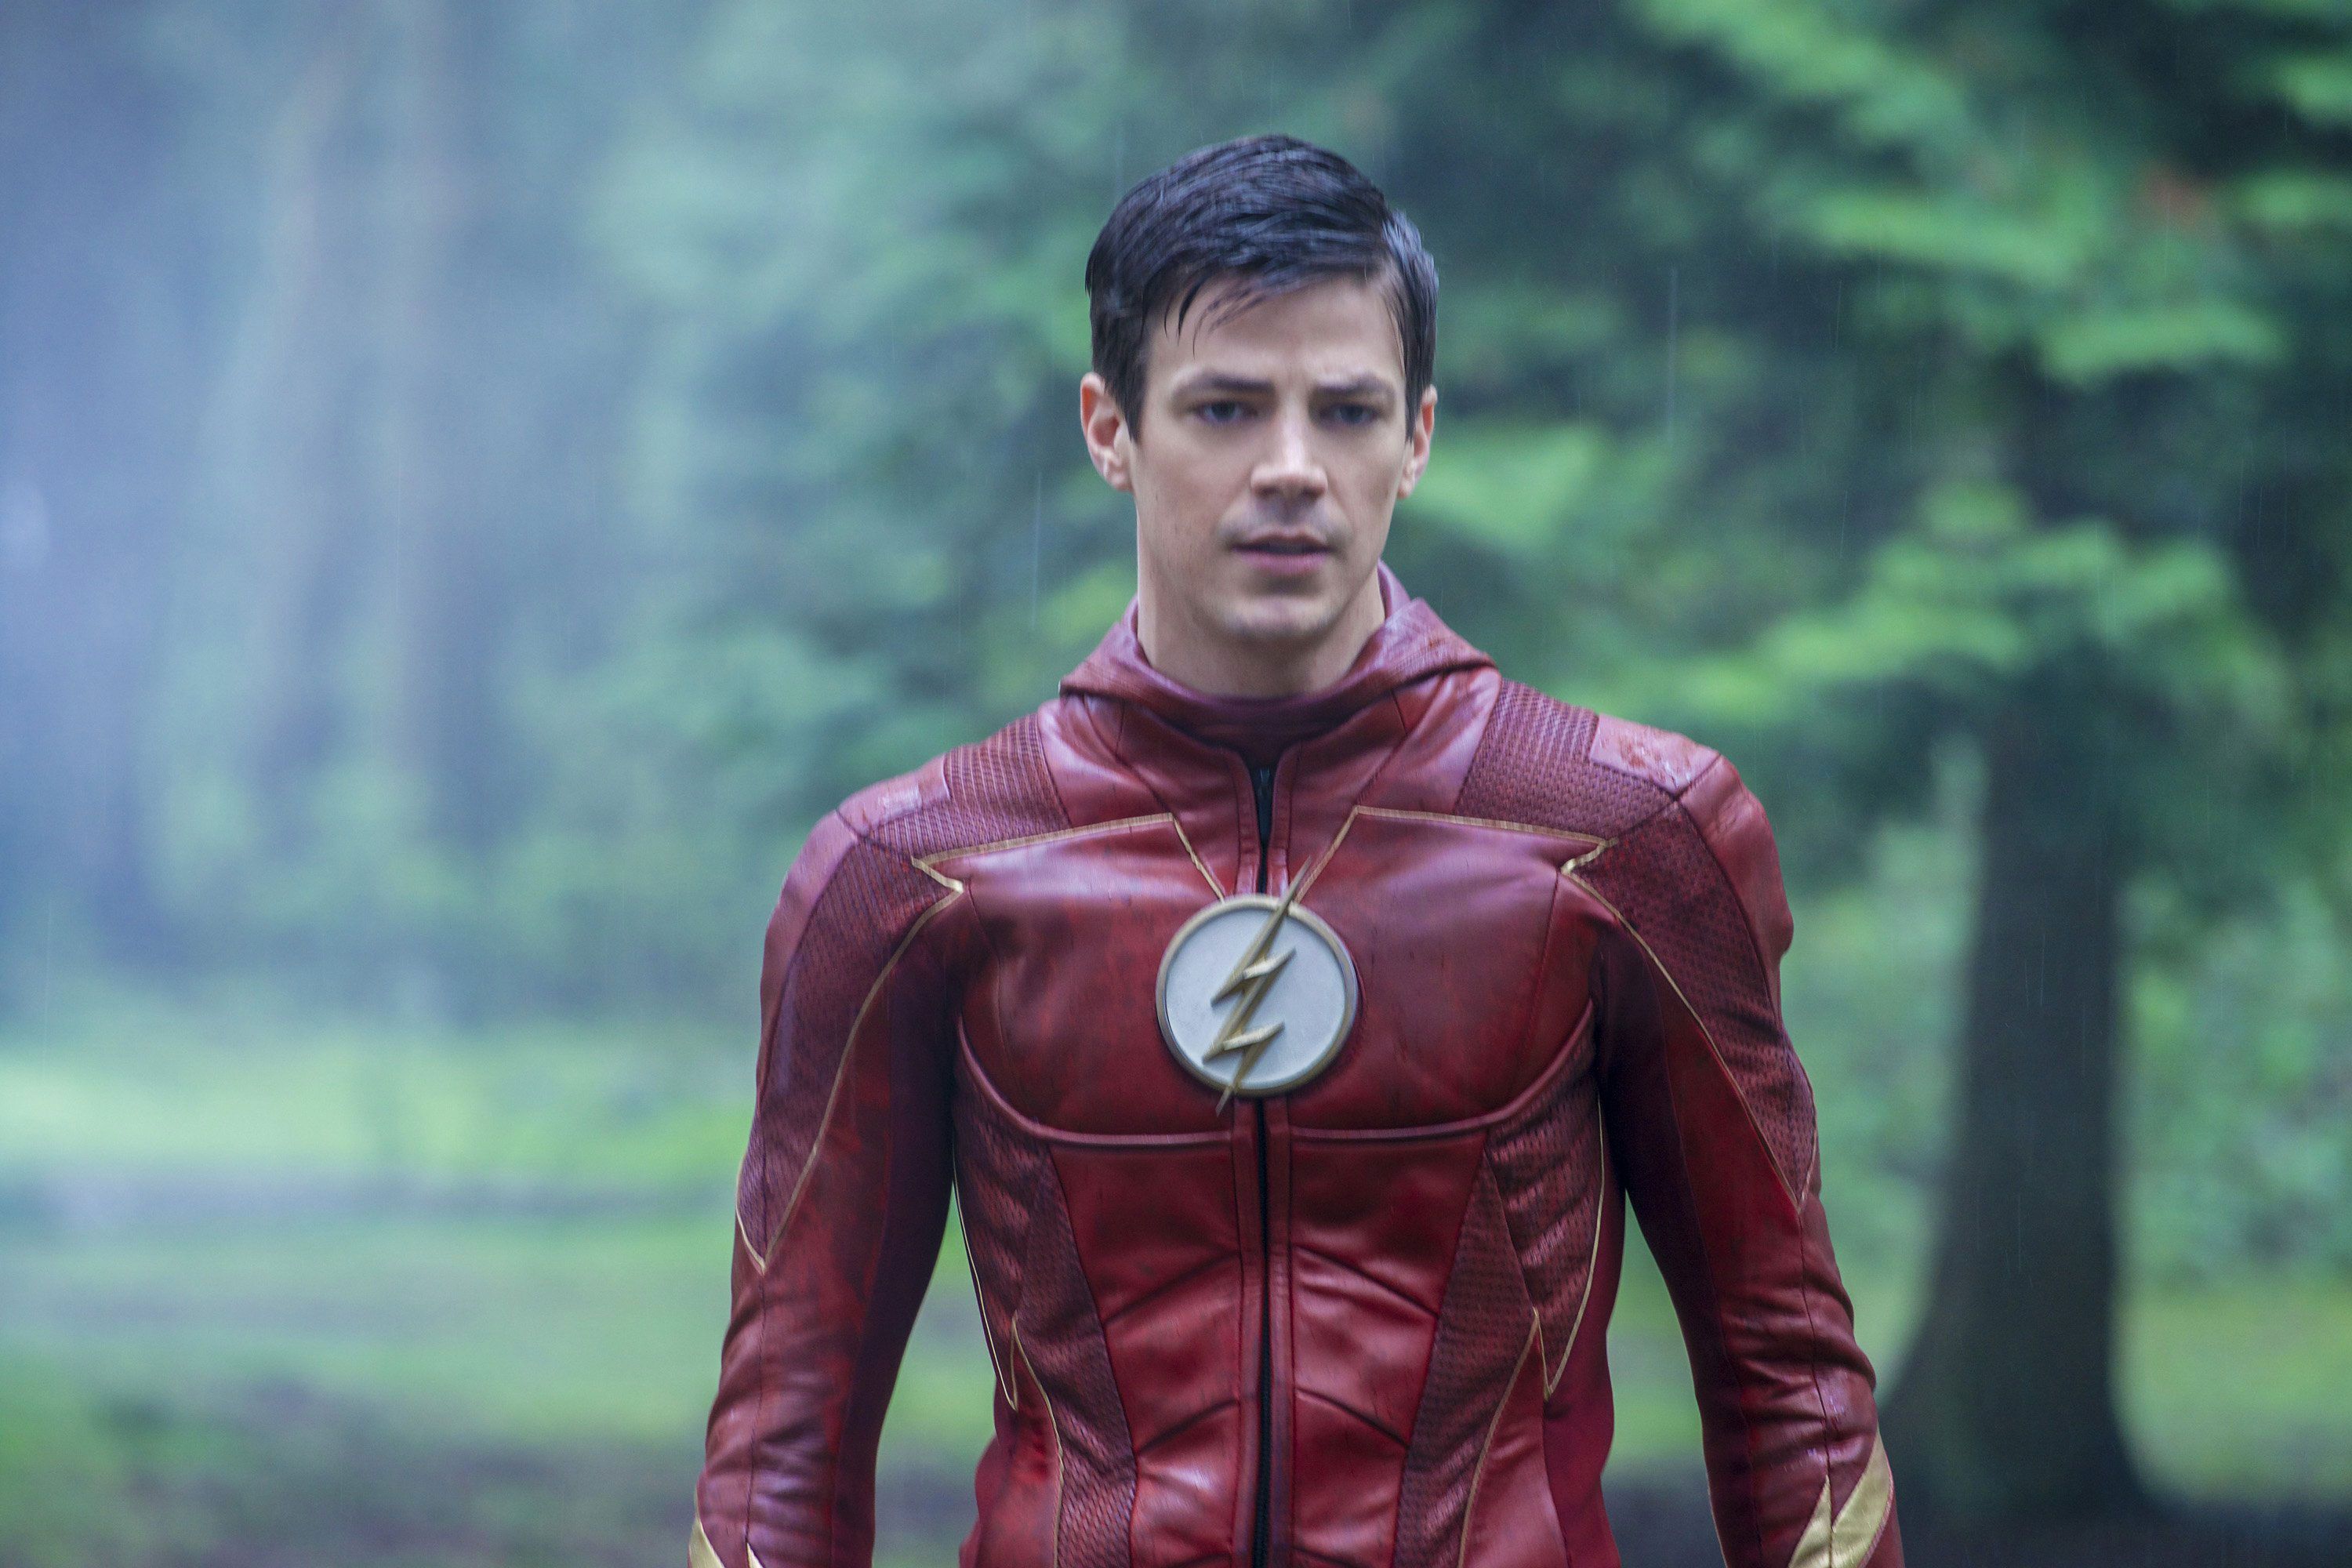 The Flash's showrunner confirms theories